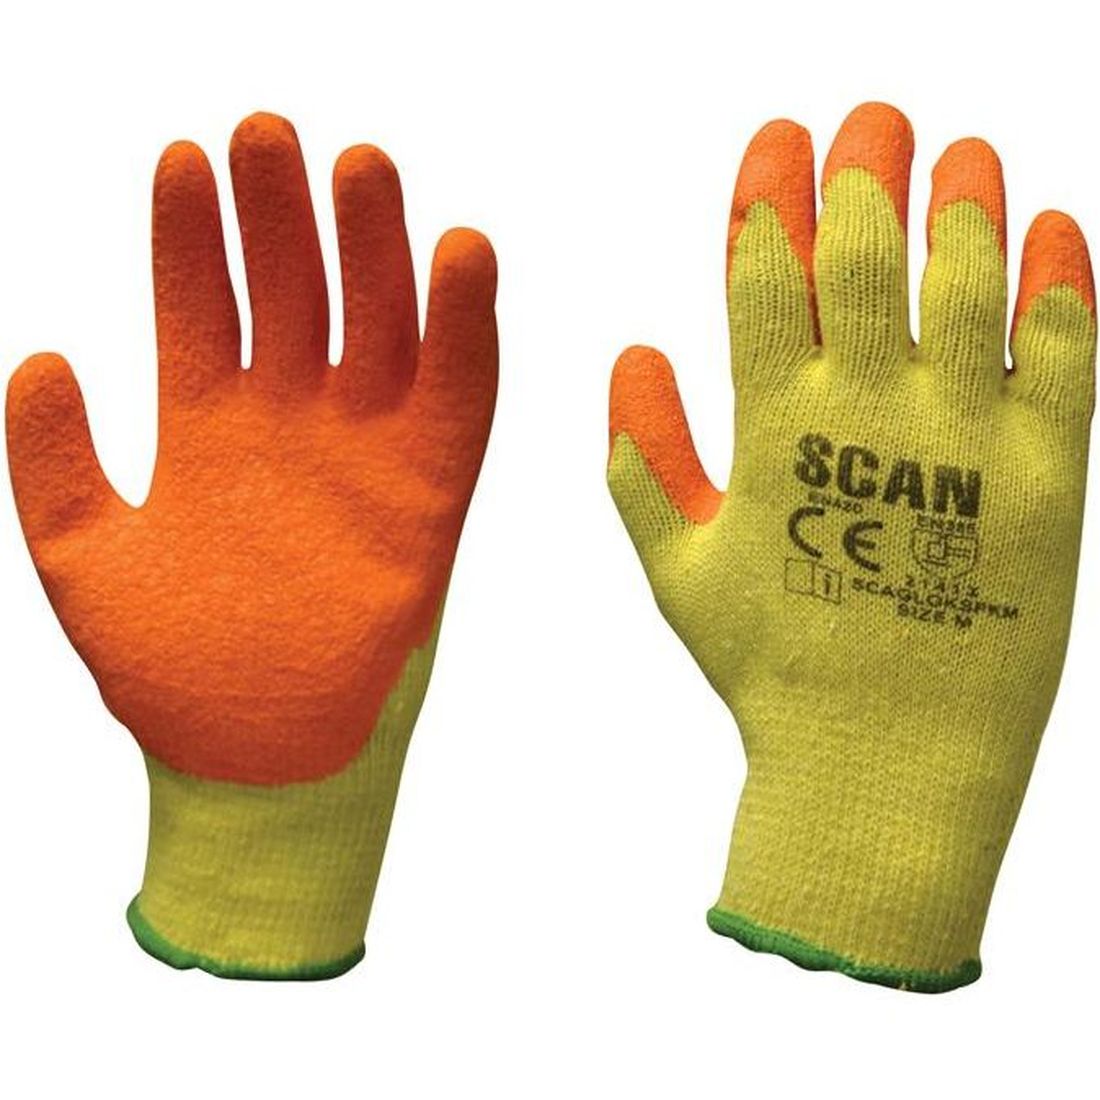 Scan Knitshell Latex Palm Gloves - XL (Size 10)                                      